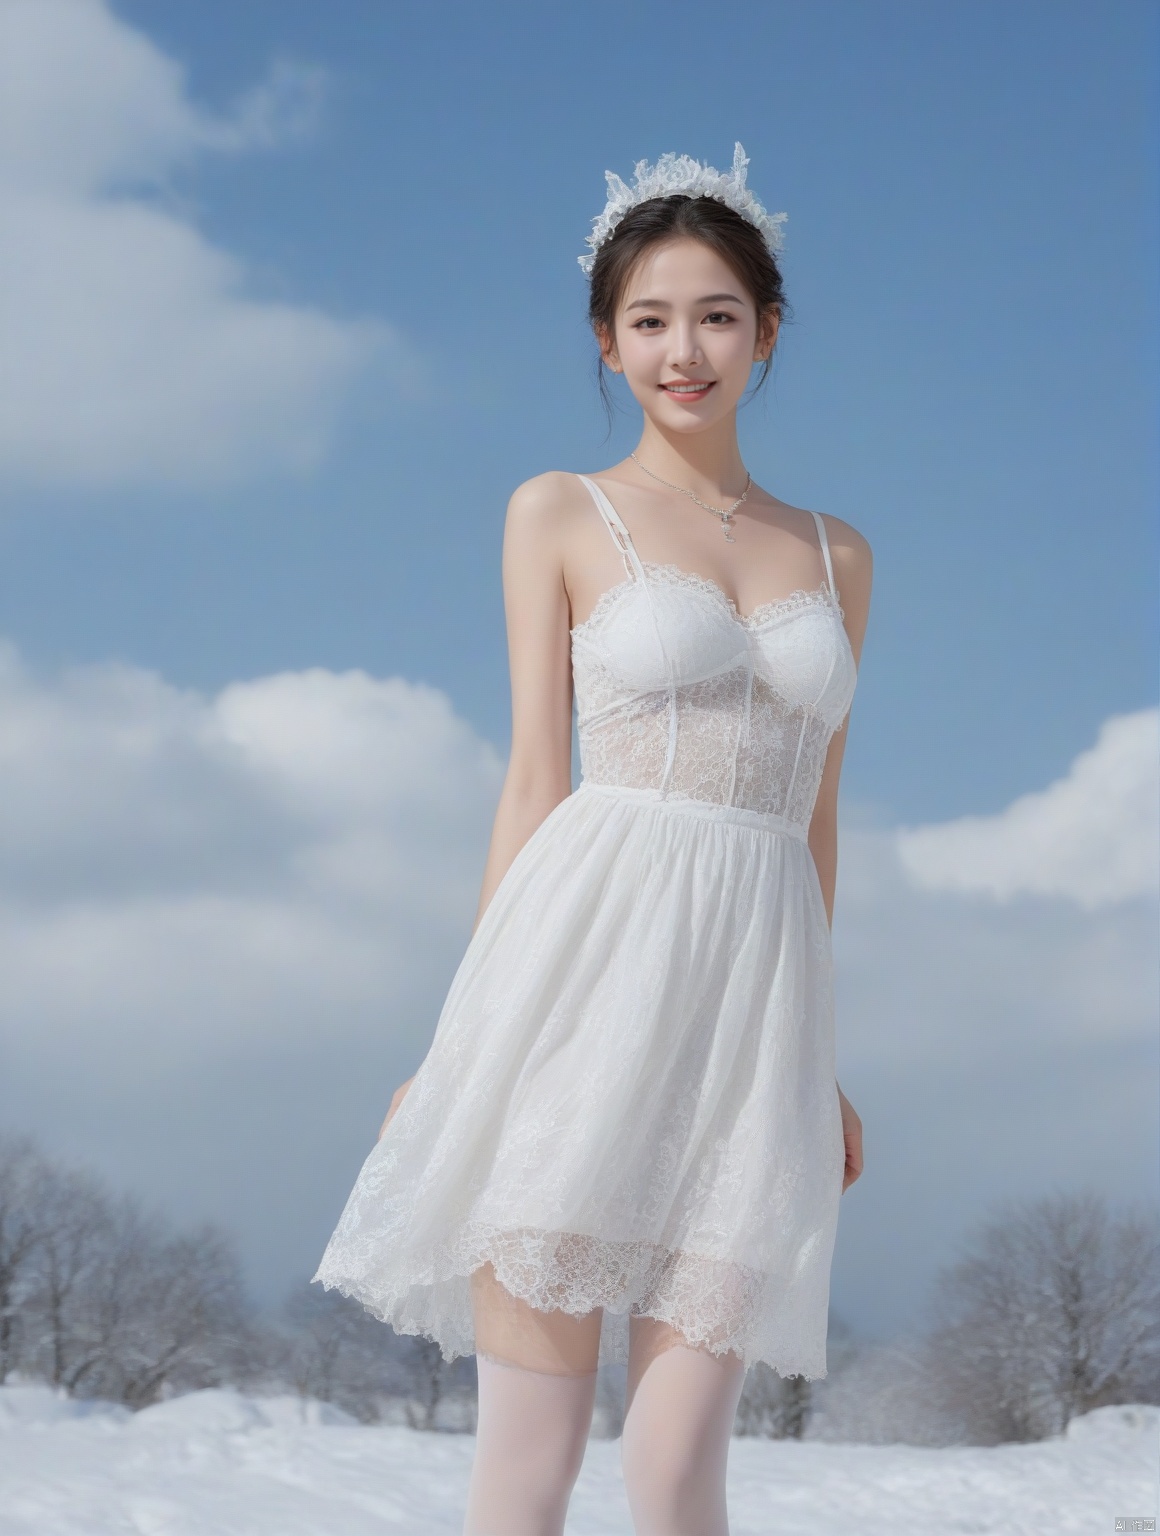  Realistic, masterpiece, highest quality, high resolution, extreme details, 1 girl, solo, bun, headdress, delicate eyes, beautiful face, shallow smile, delicate necklace, suspender dress, white lace dress, light gauze, snow-white skin, delicate skin texture, silver bracelet, pantyhose, high heels, elegant standing, outdoor, blue sky, white clouds, flowers, flowers, grass, movie light, light, light tracking, (Nikon AF-S 105mm f / 1.4E ED),